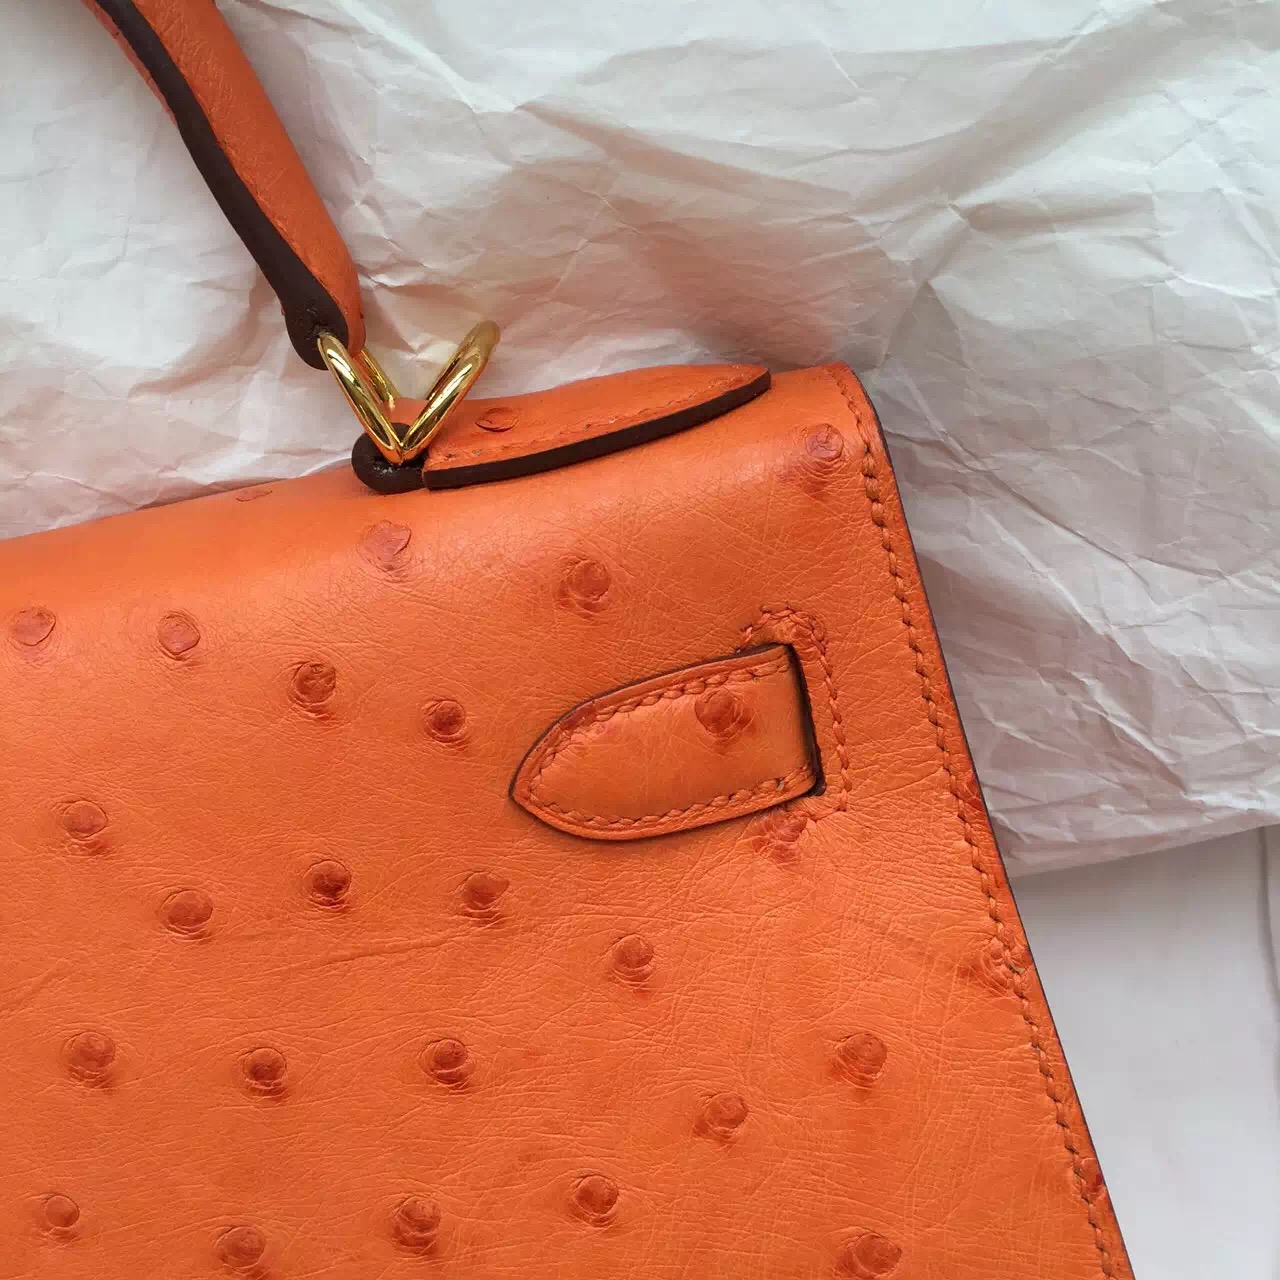 Hand Stitching Hermes Ostrich Leather Sellier Kelly Bag 28CM in Orange